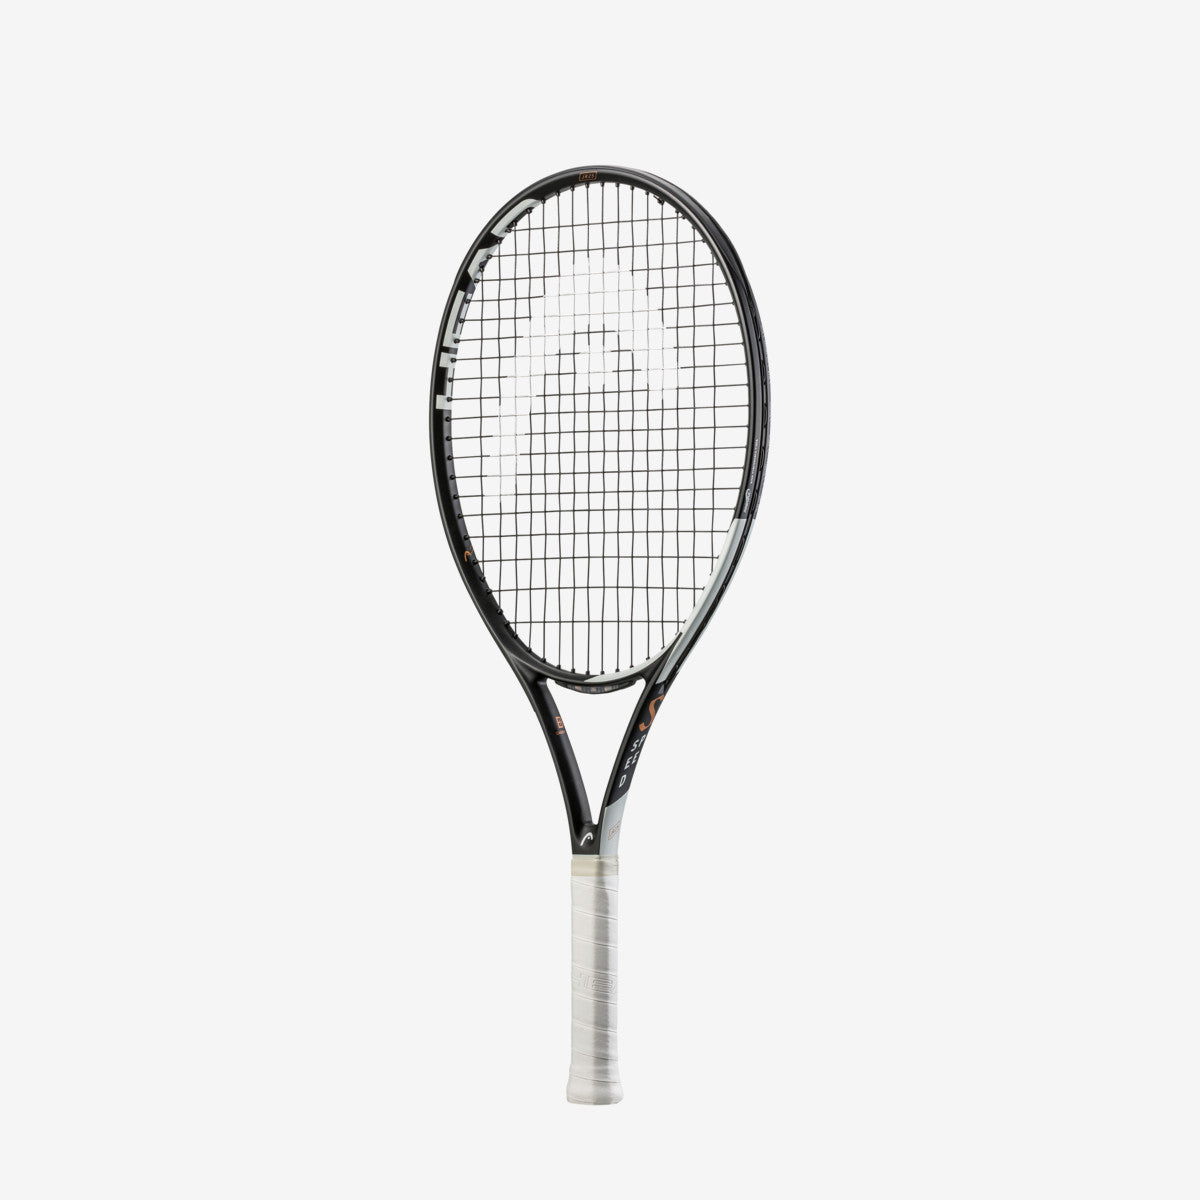 The Head Speed Junior 25 Inch Tennis Racket which is available for sale at GSM Sports.       